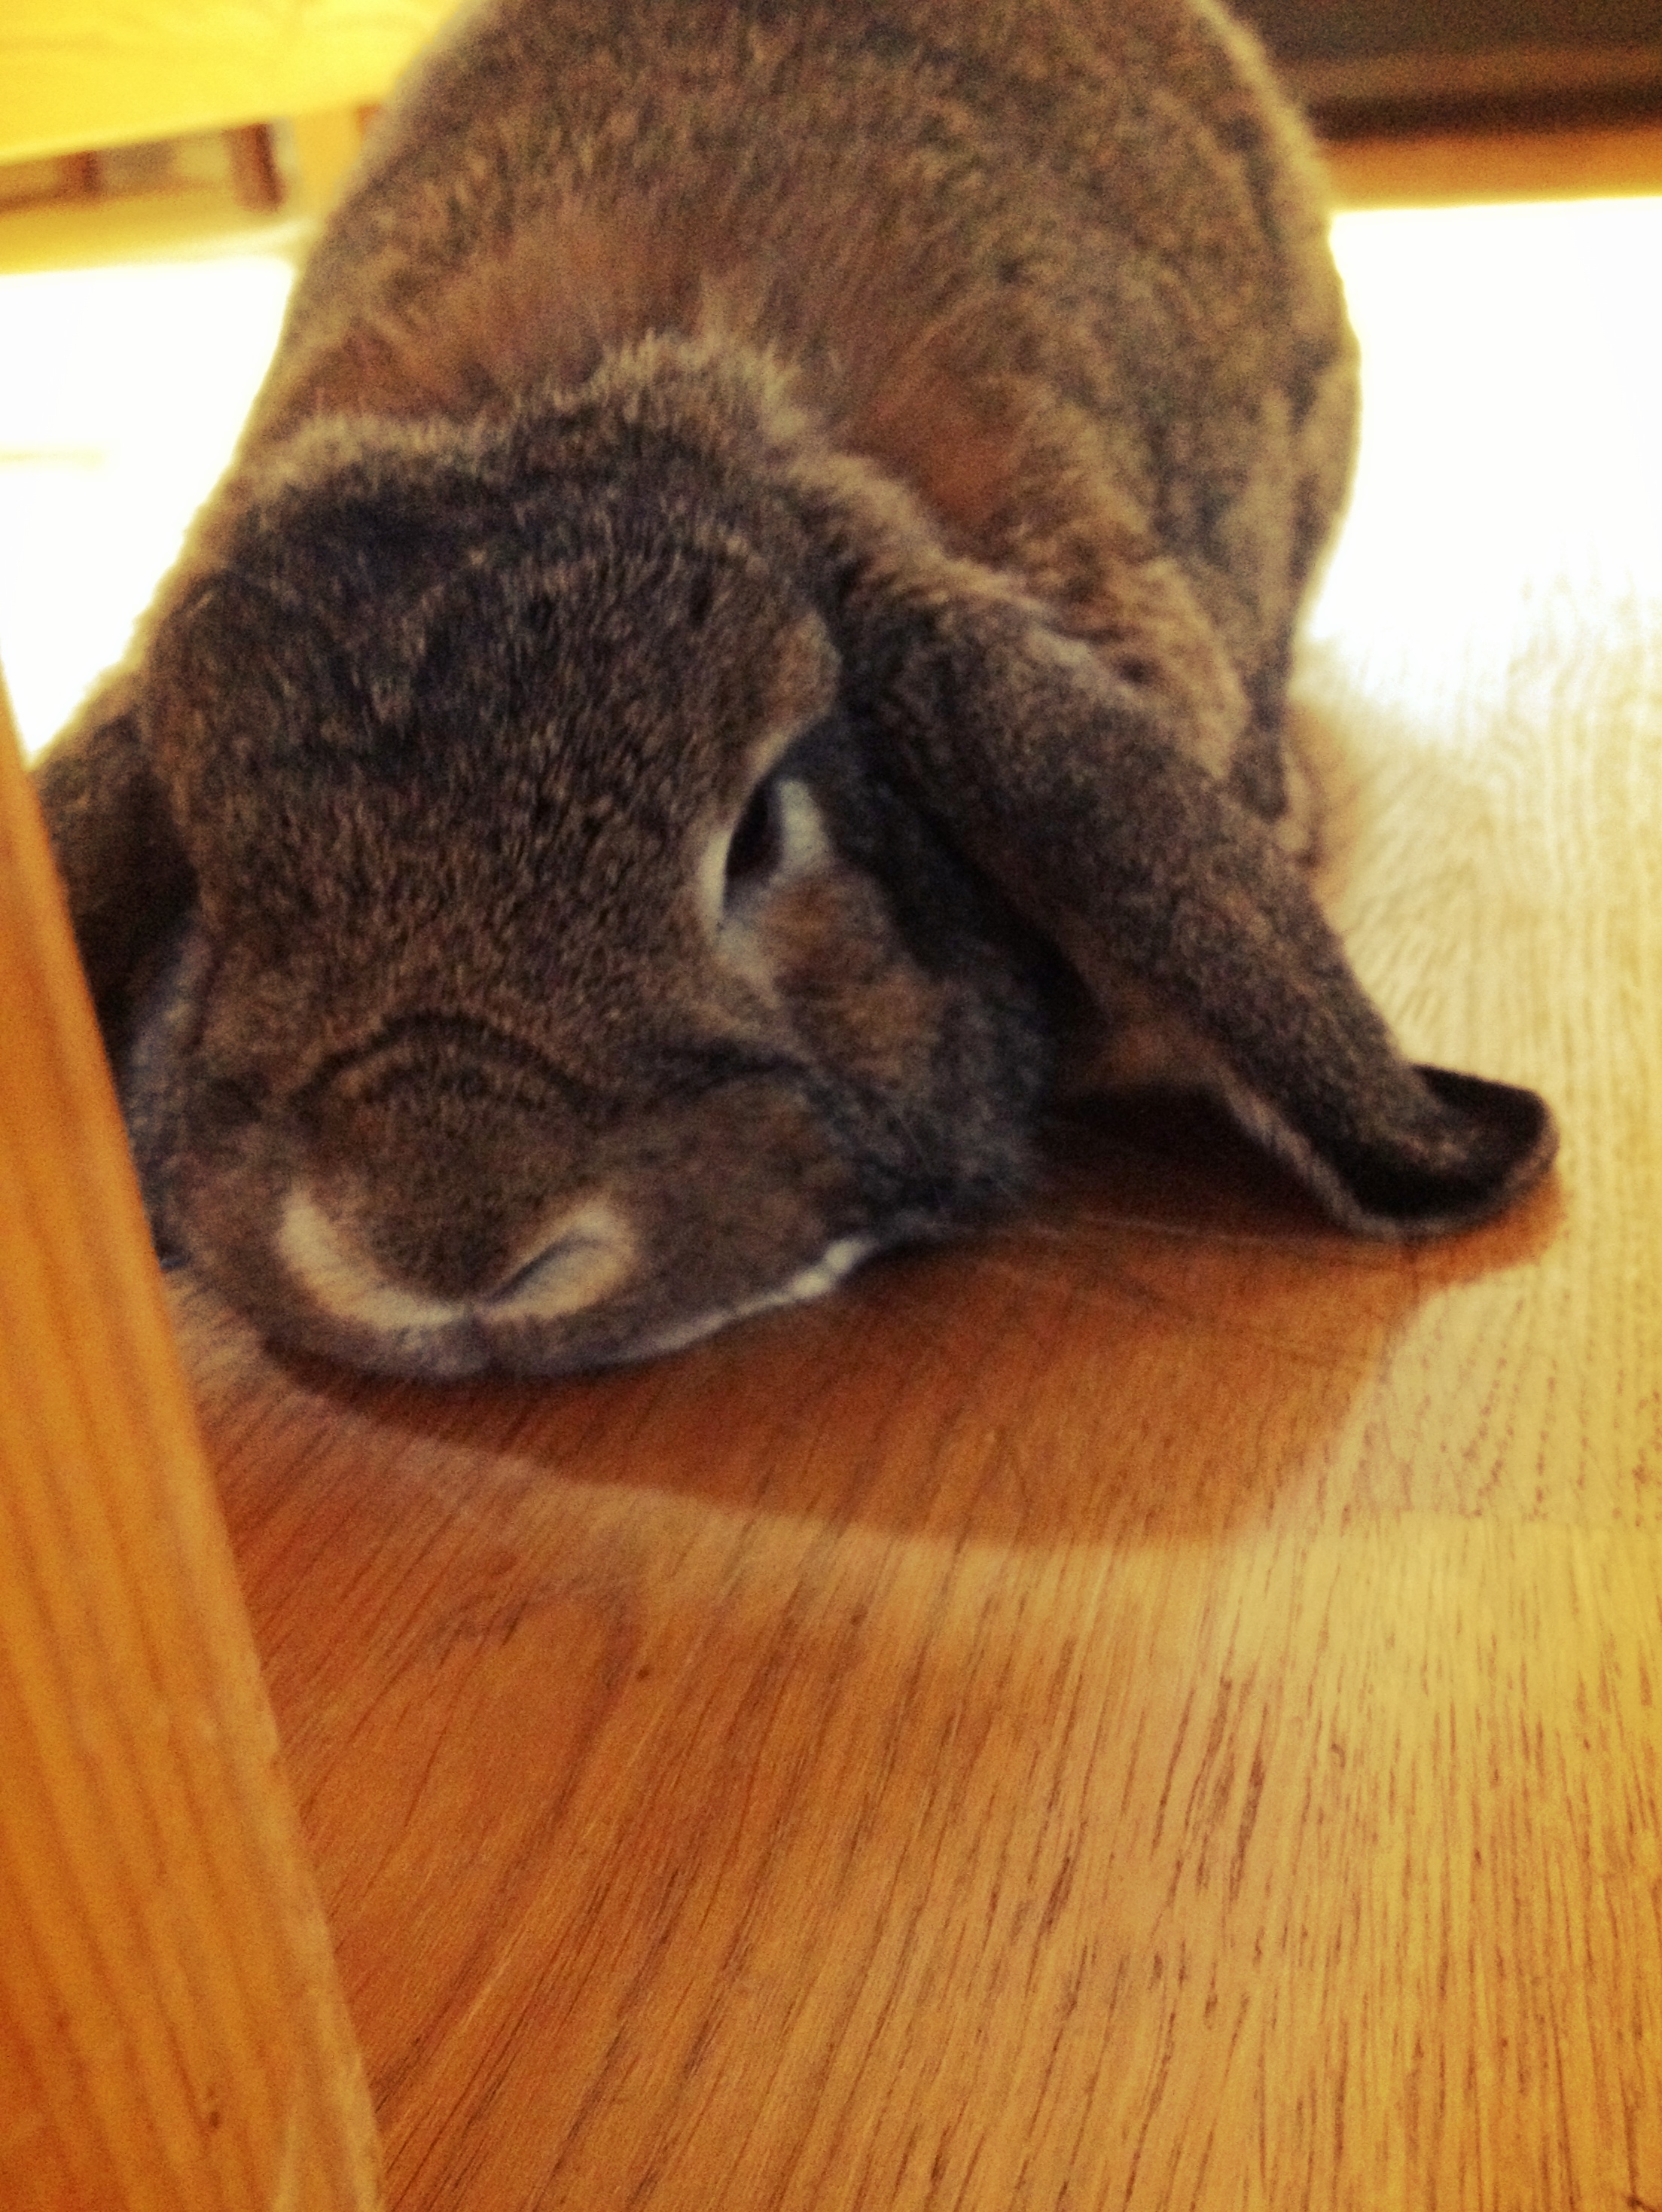 Bunny Puts Her Head Down for Petting